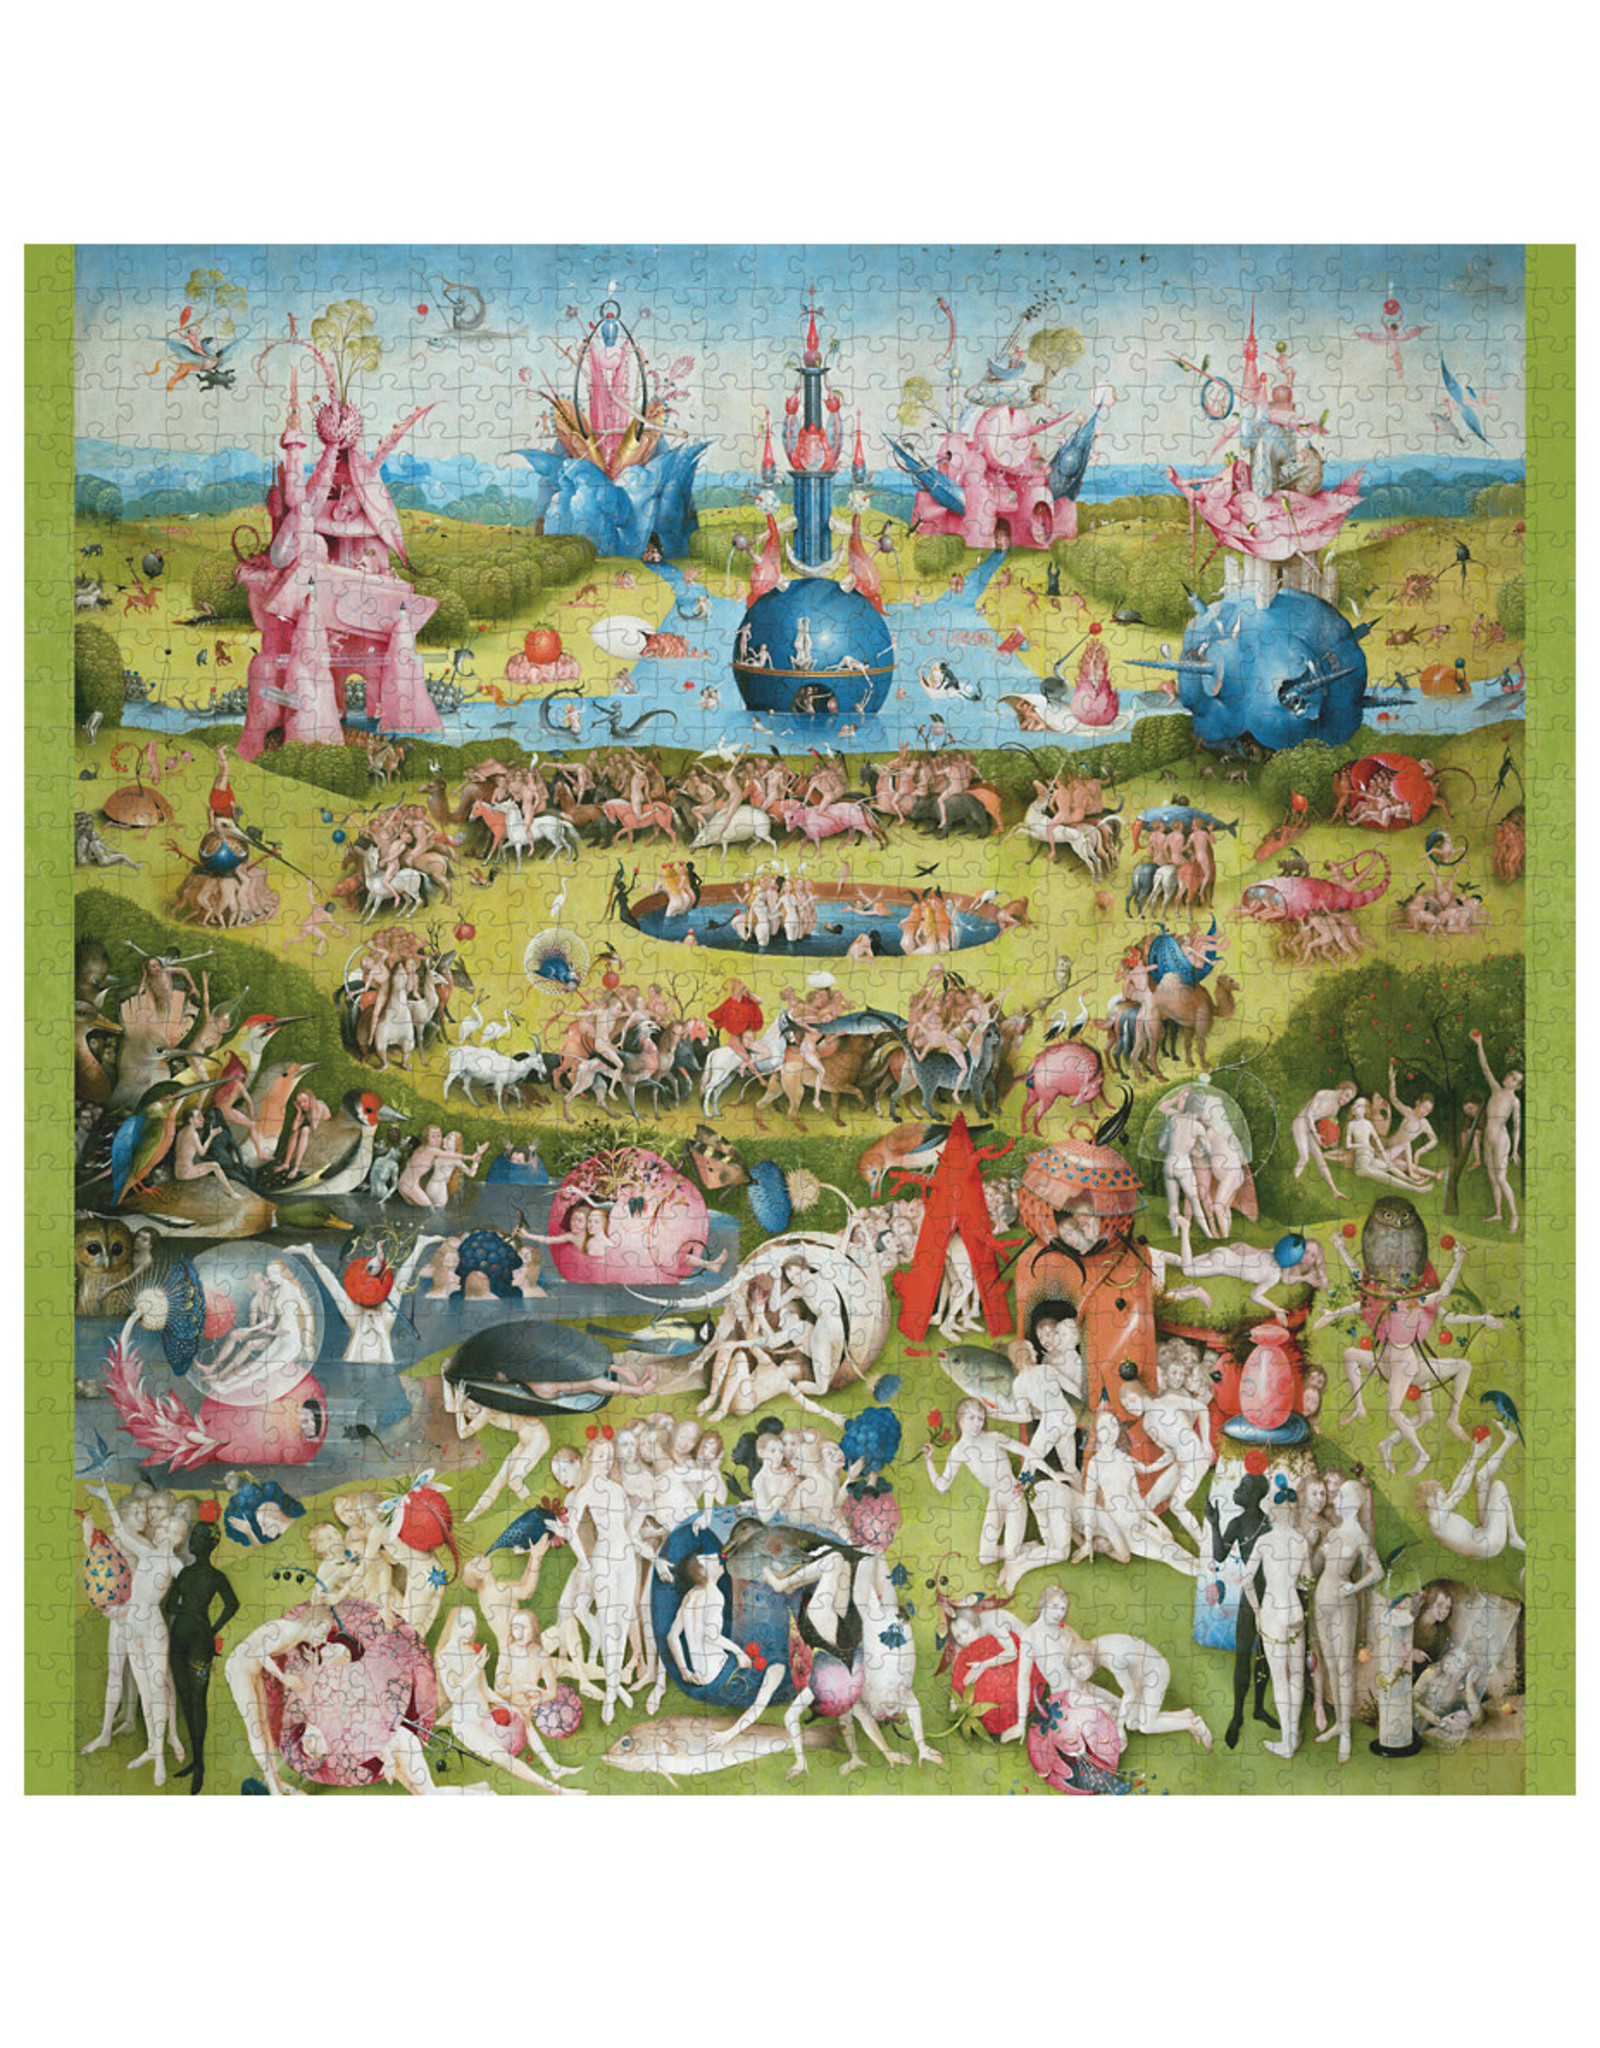 Pomegranate Hieronymus Bosch: The Garden of Earthly Delights 1000-Piece Jigsaw Puzzle